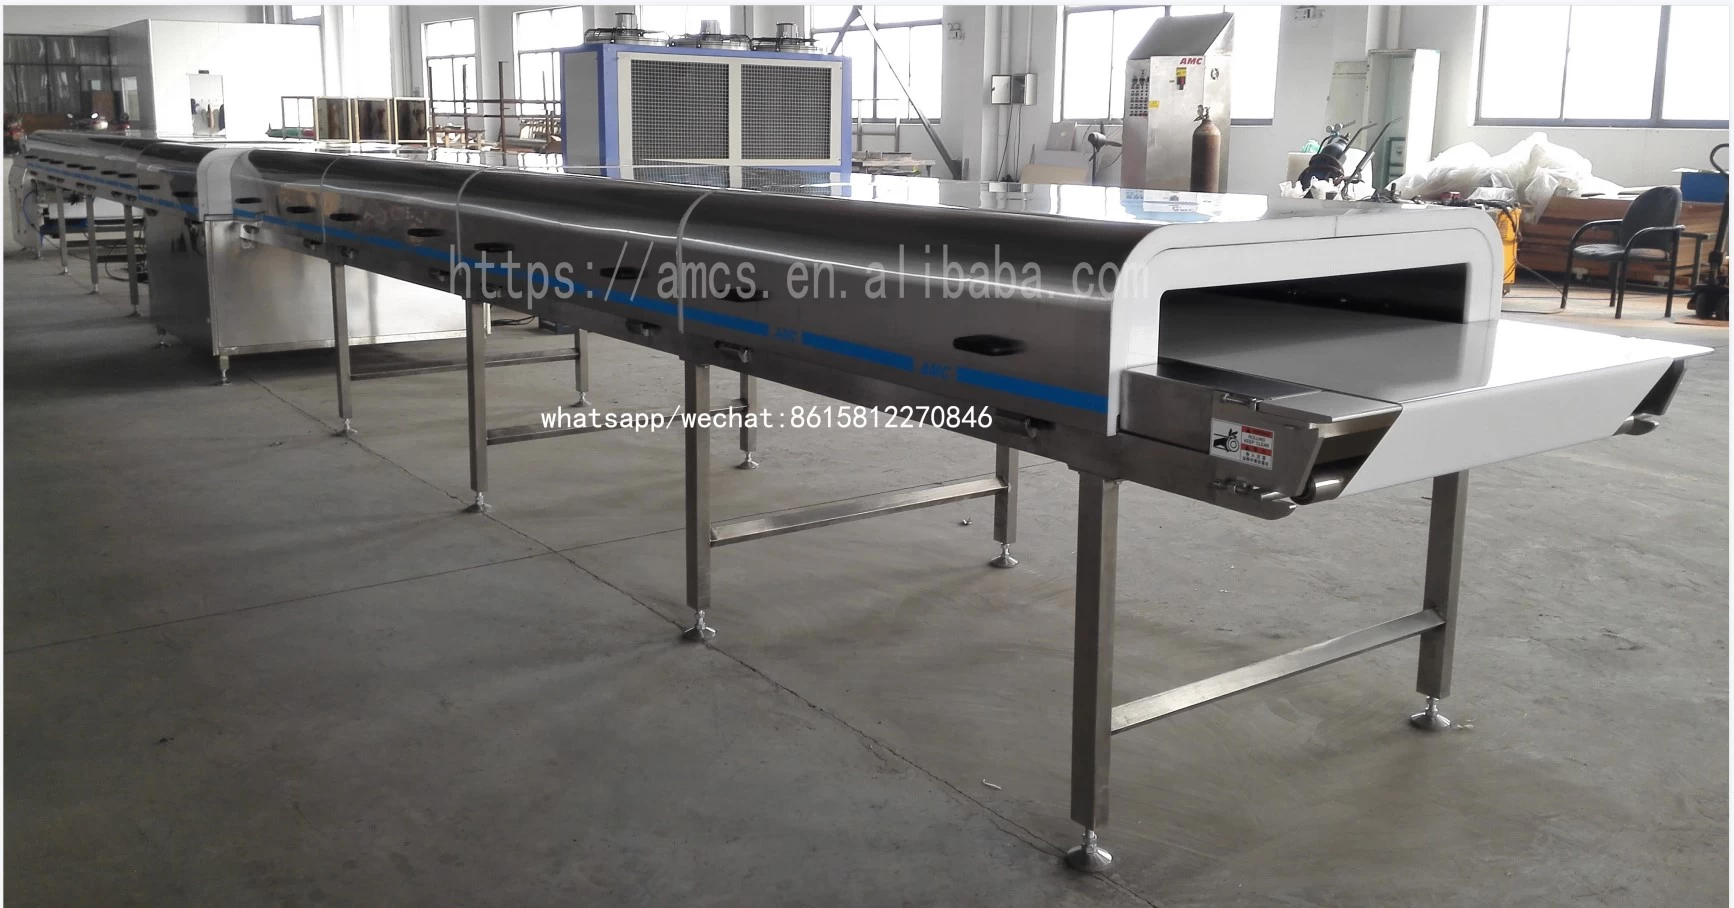 AMC Cooling Conveyor Systems Over 20 Years Of Excellence